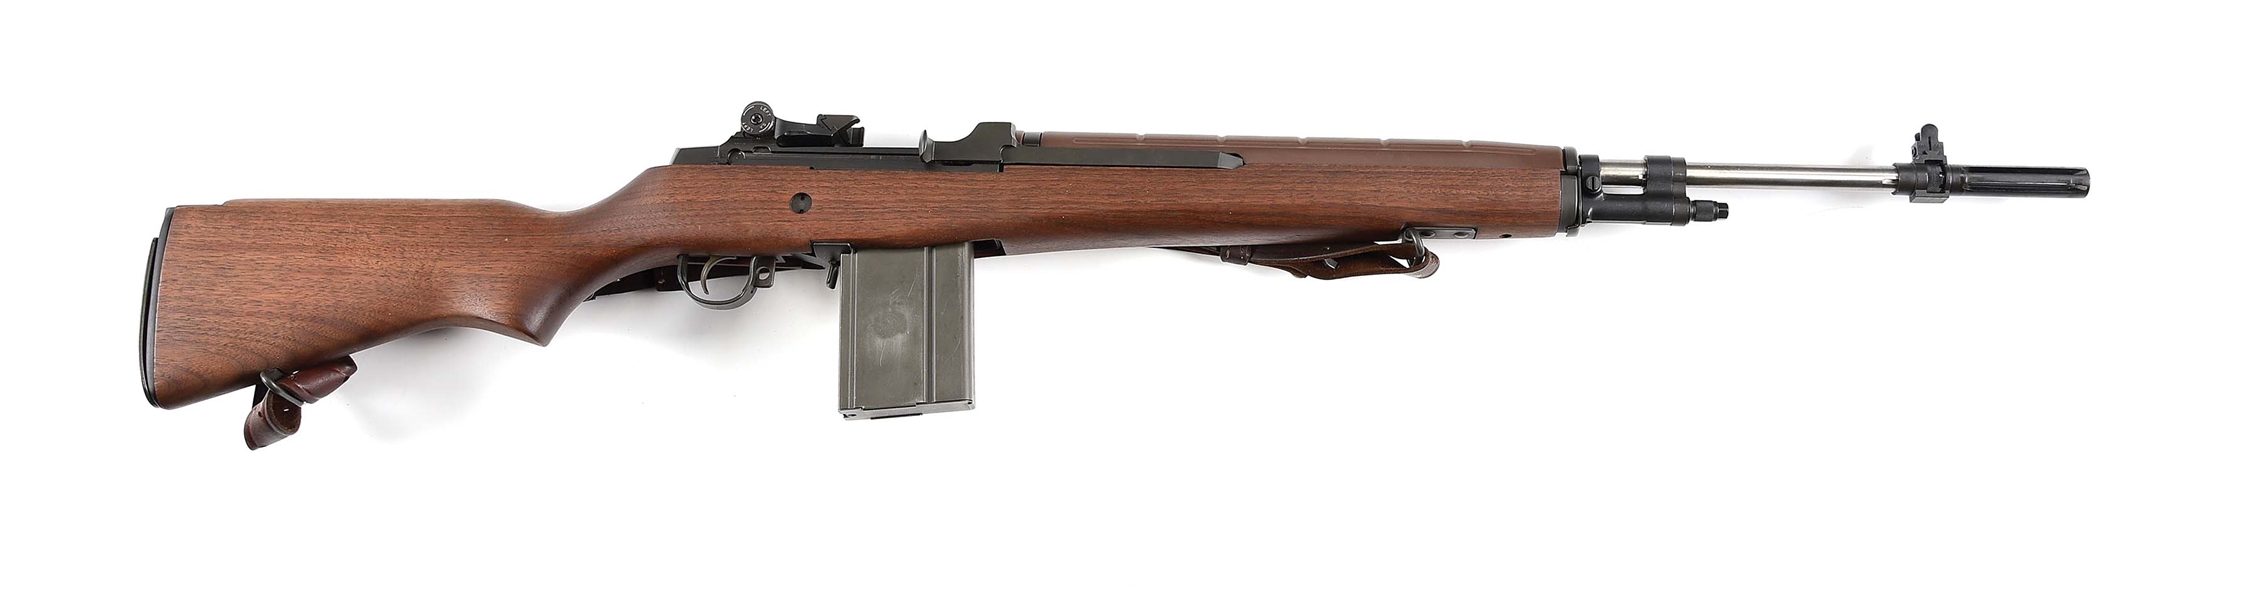 (M) EXCELLENT SPRINGFIELD M1A NATIONAL MATCH SEMI-AUTOMATIC RIFLE.